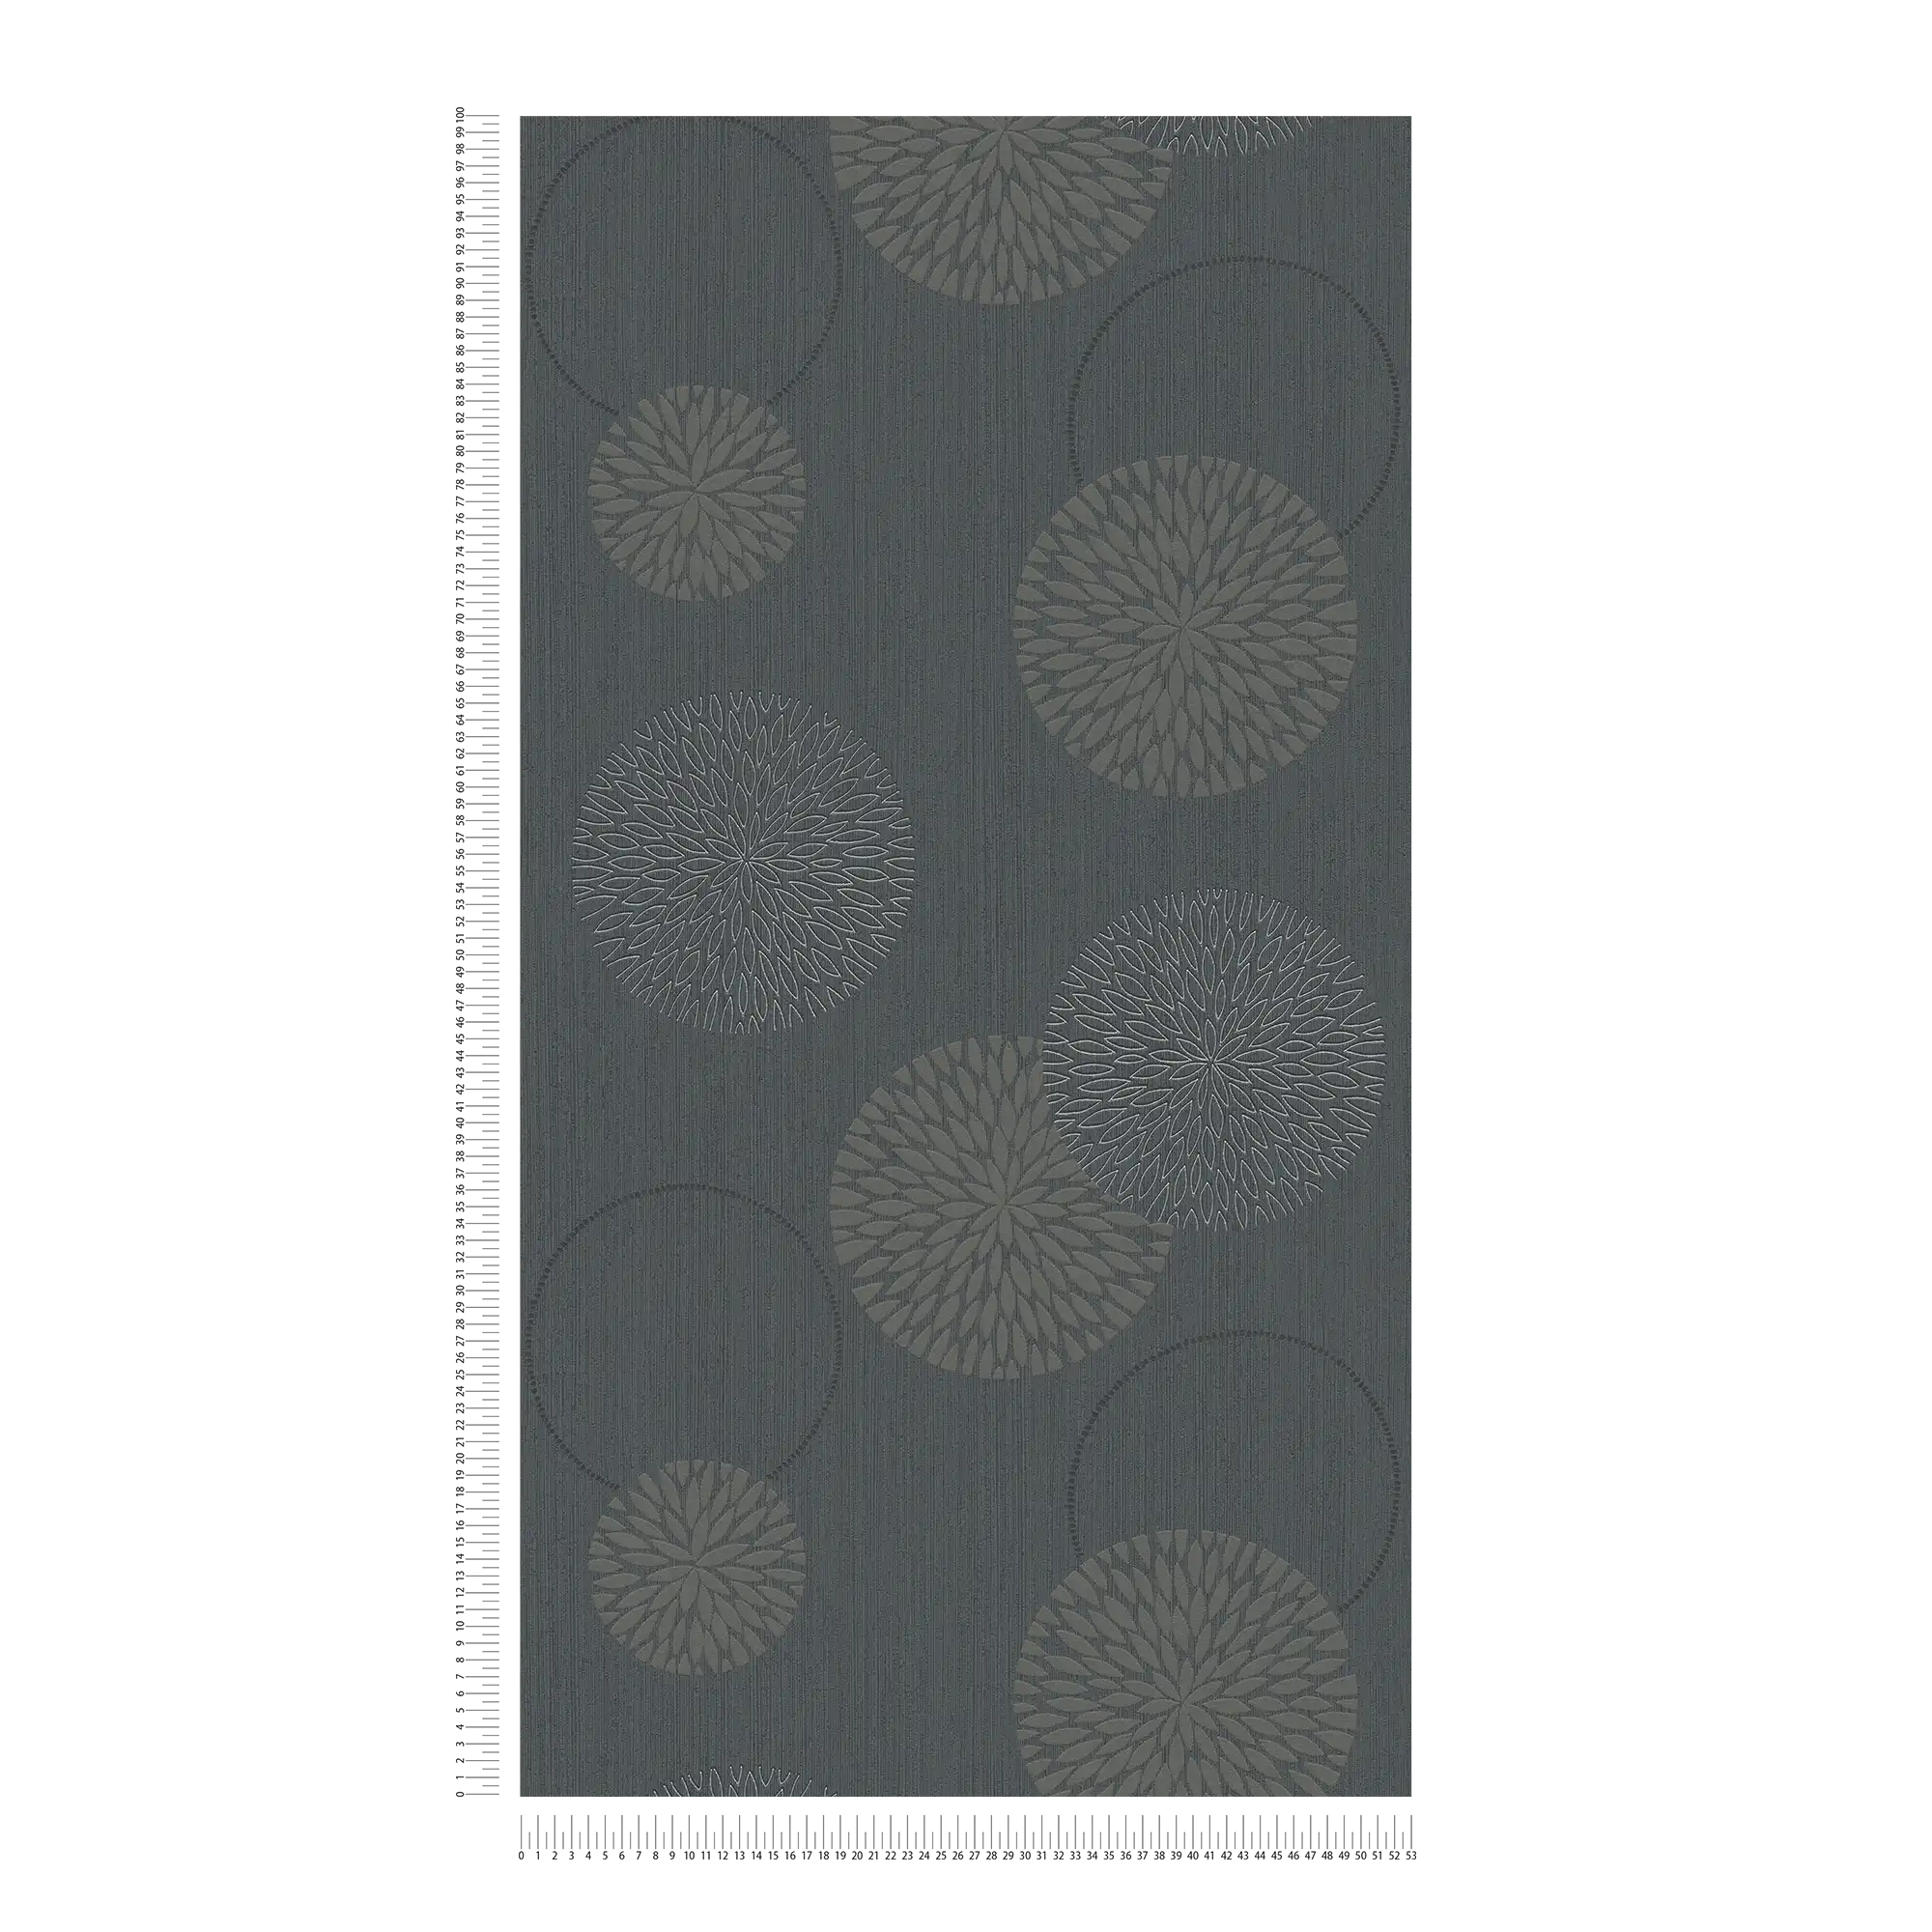             Non-woven wallpaper flowers in abstract design - grey, black
        